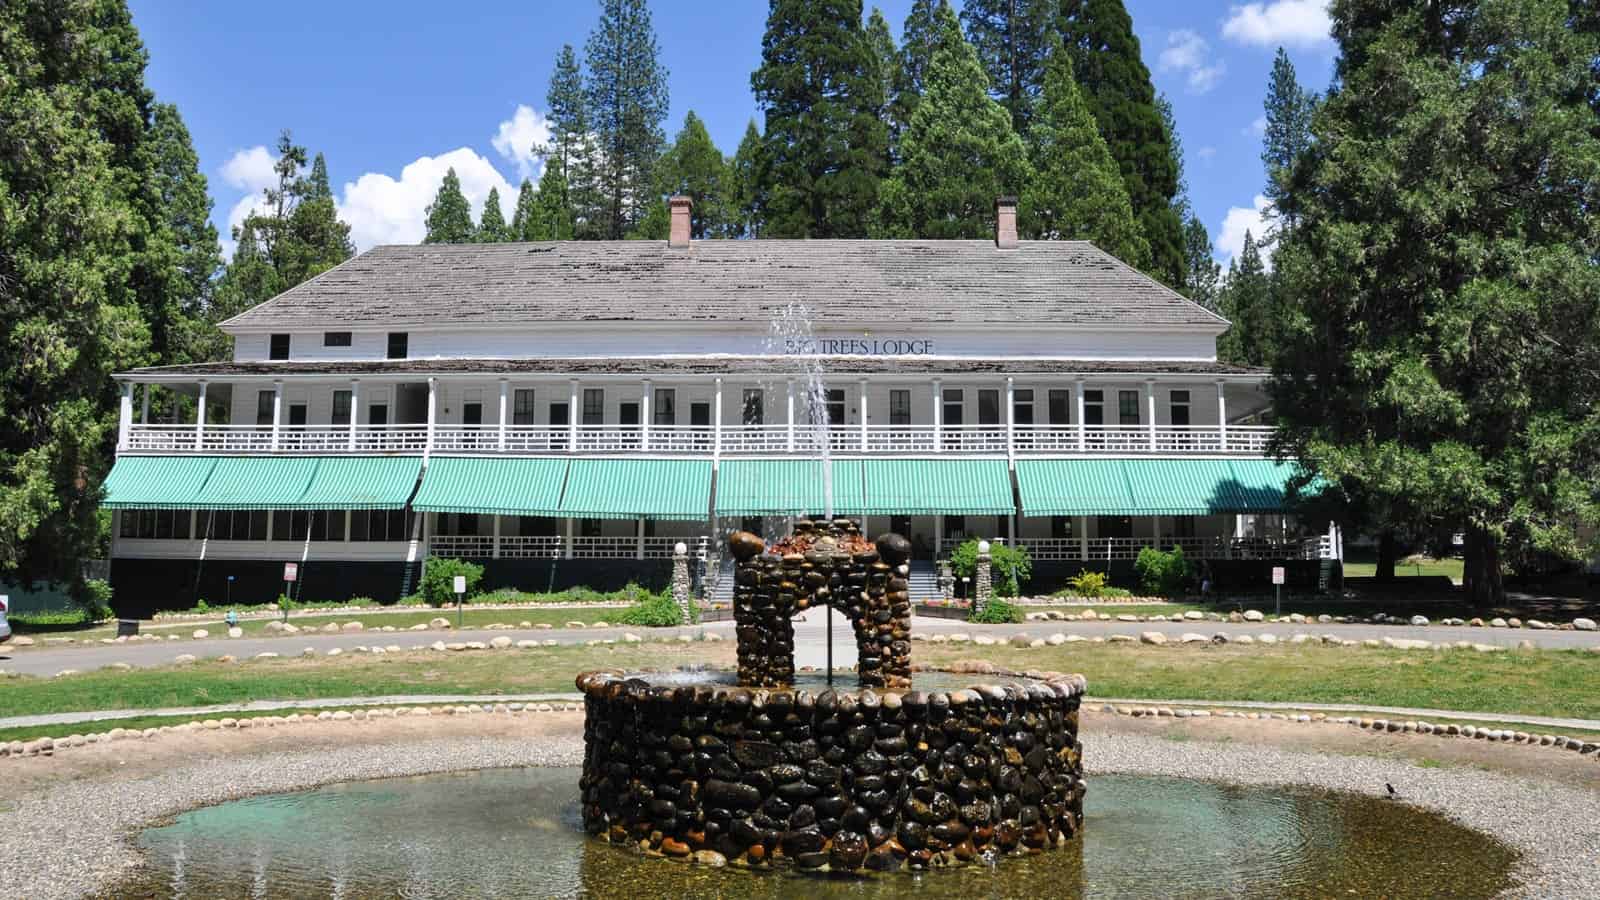 Historic Wawona Hotel in Yosemite National Park, a charming two-story structure with white walls and green trim, featuring a stone fountain in the foreground, surrounded by lush greenery and towering trees under a clear blue sky